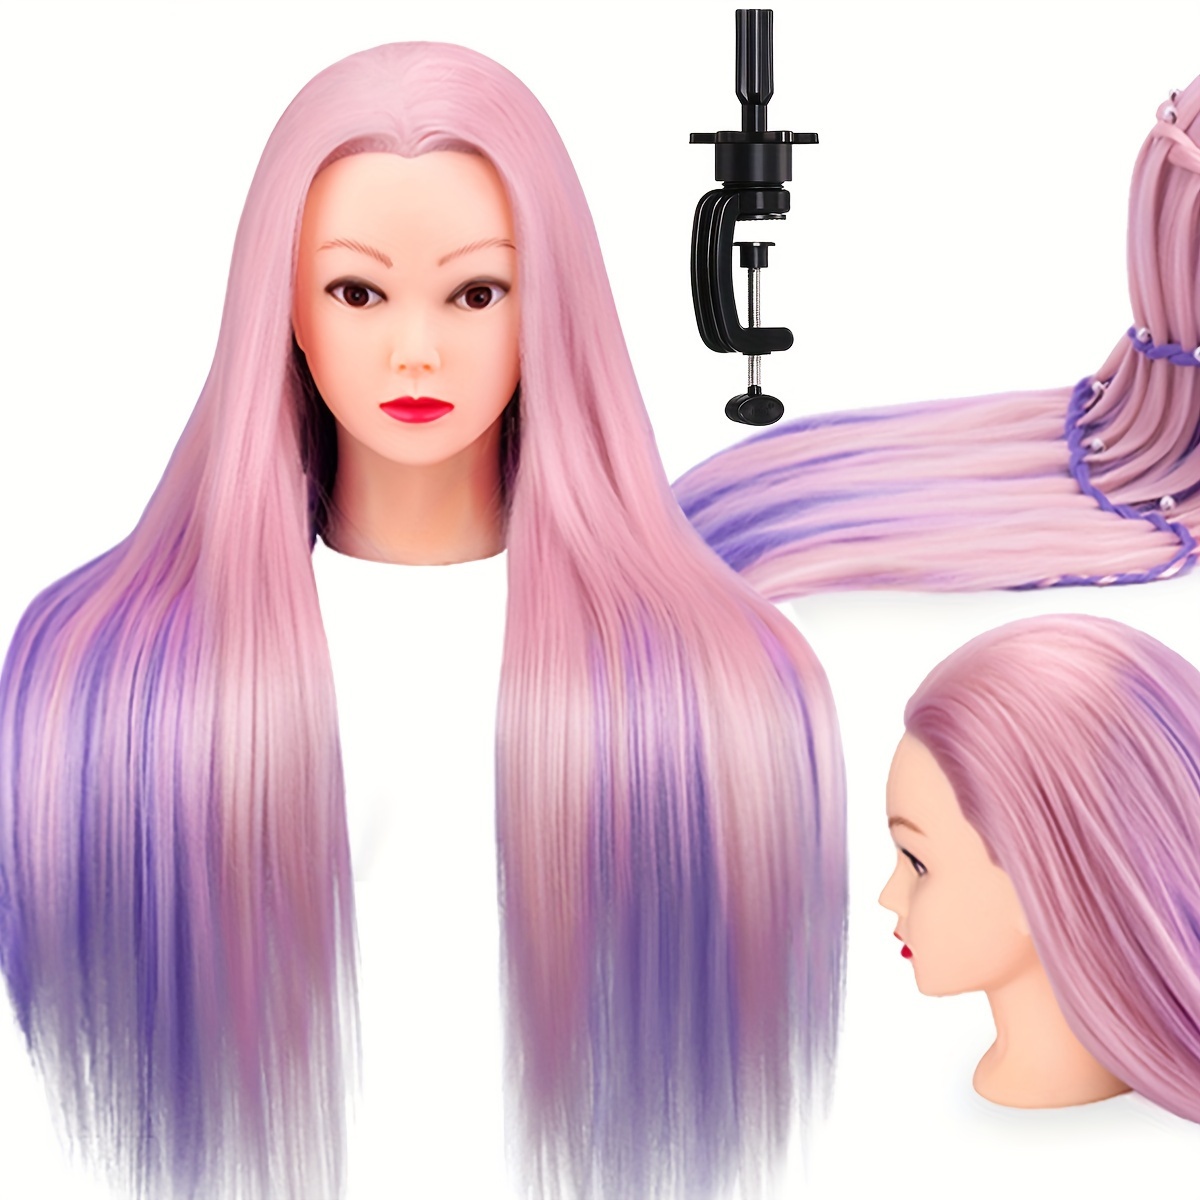 

Mannequin Head With Hair, 29 Inch Hair Mannequin Manikin Head Hair Practice Cosmetology Hair Doll Head Styling Hairdressing Training Braiding Cutting Setting With Clamp Holder